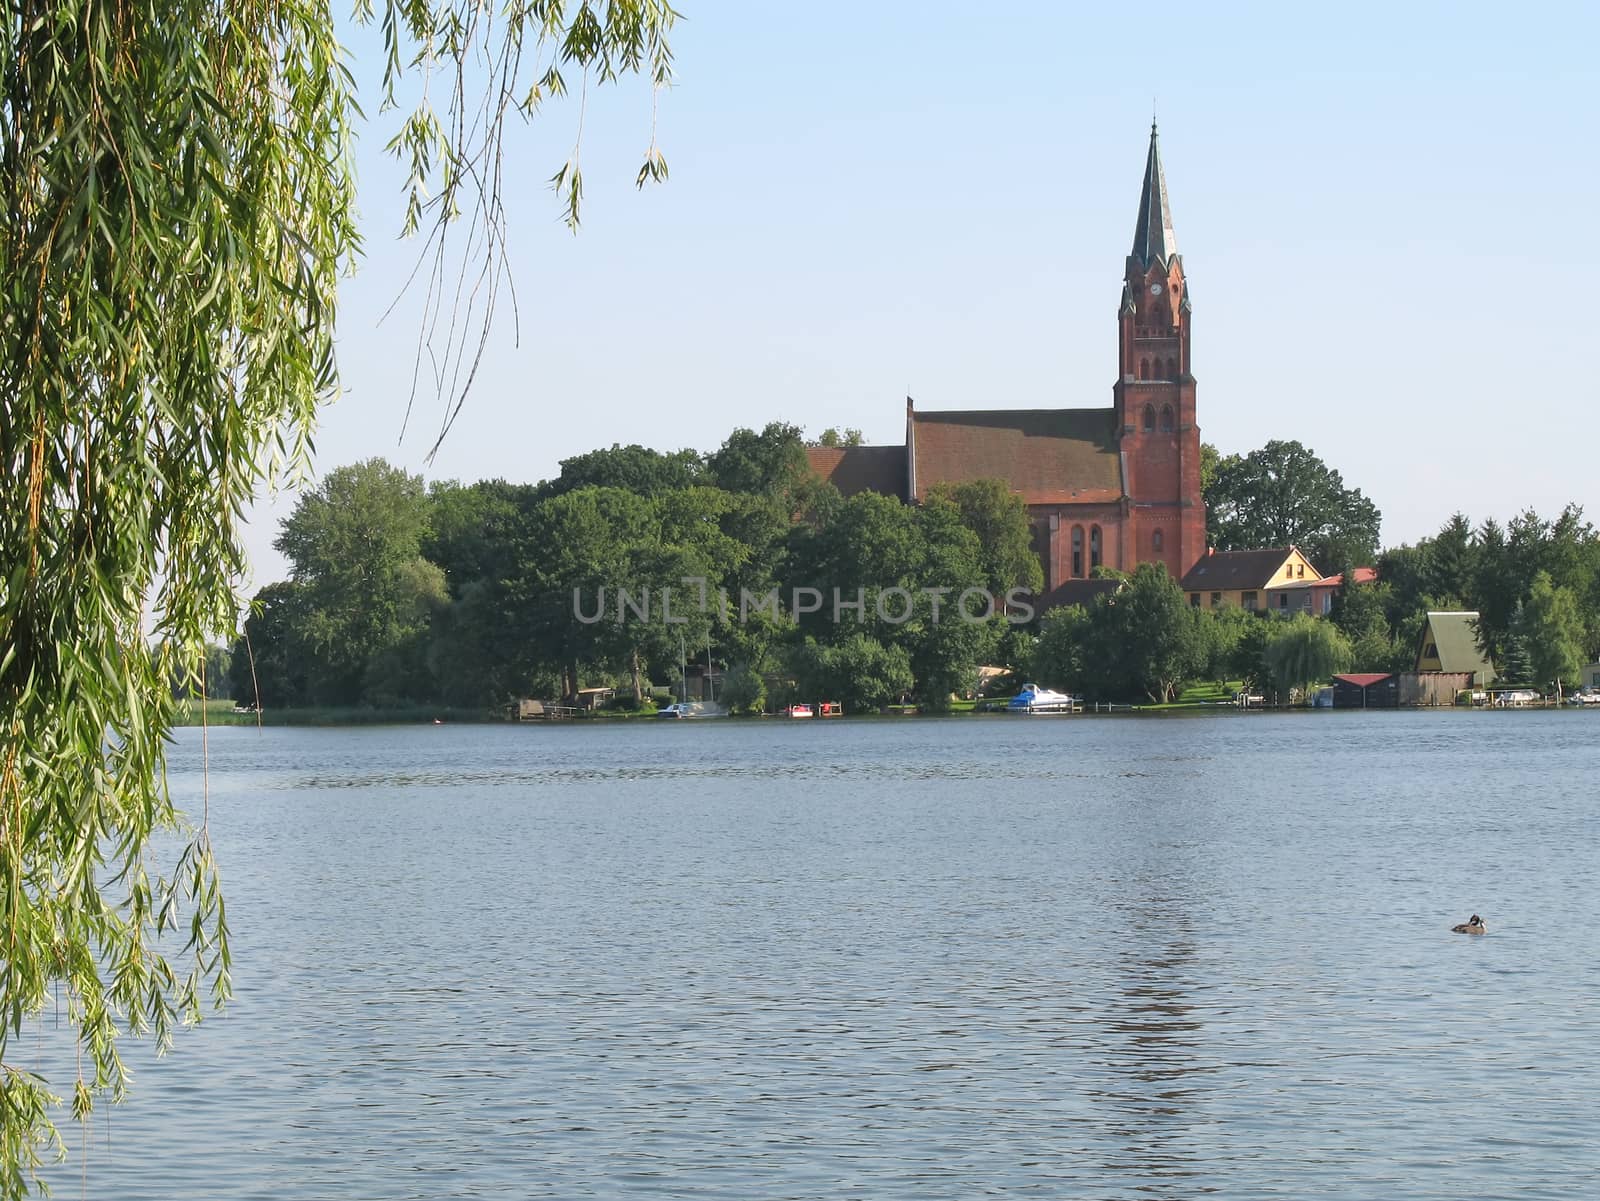 View onto the lake Mueritz and St. Marien Church in Roebel, Mecklenburg-Western Pomerania, Germany.